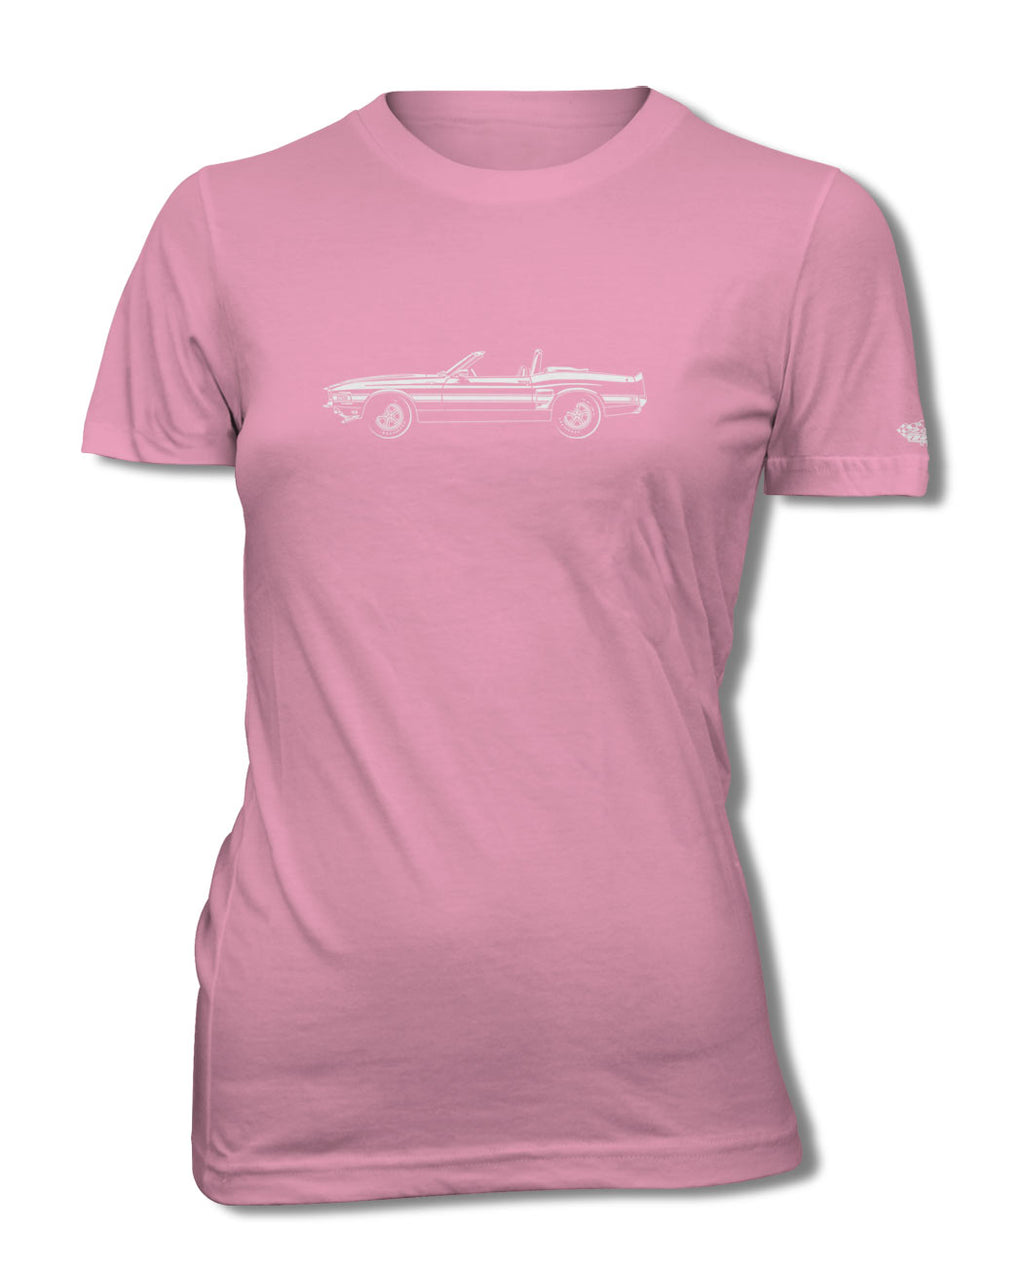 1969 Ford Mustang Shelby GT500 Convertible T-Shirt - Women - Side View